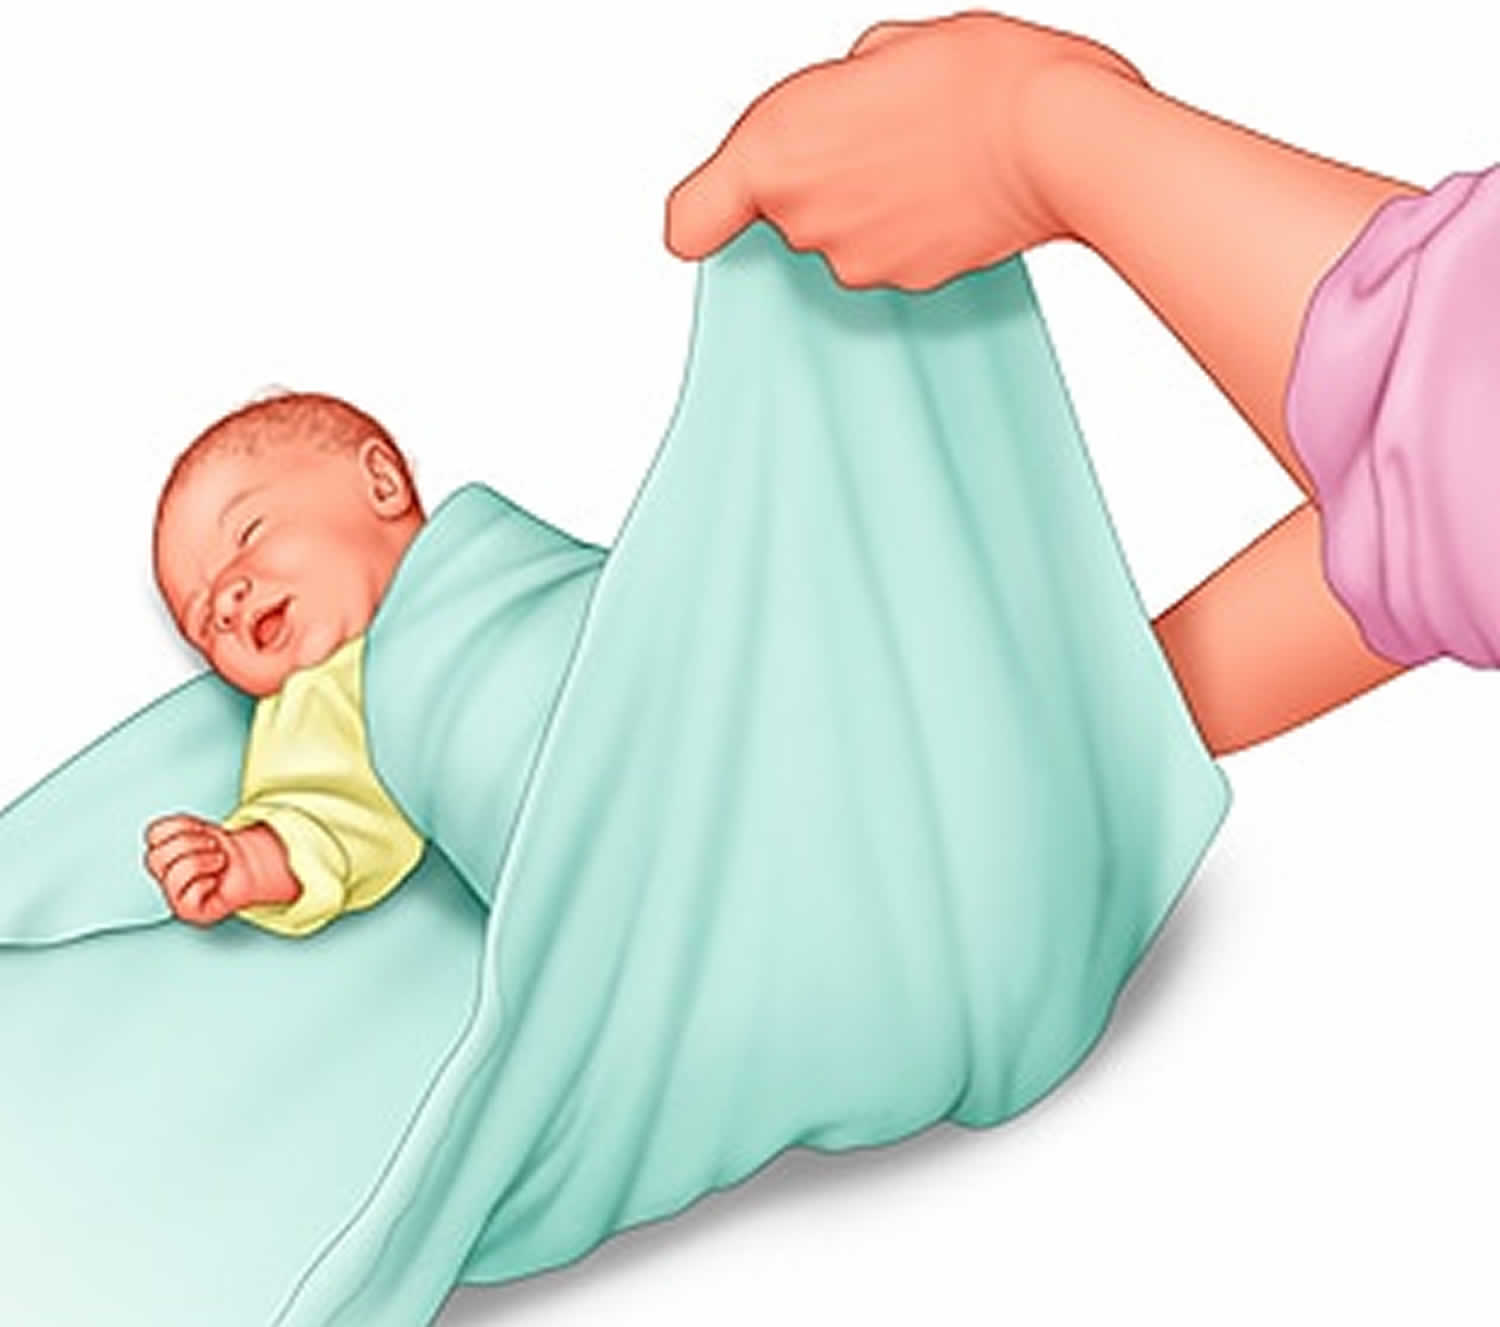 Swaddling baby techniques &  safety, when you stop swaddling your baby